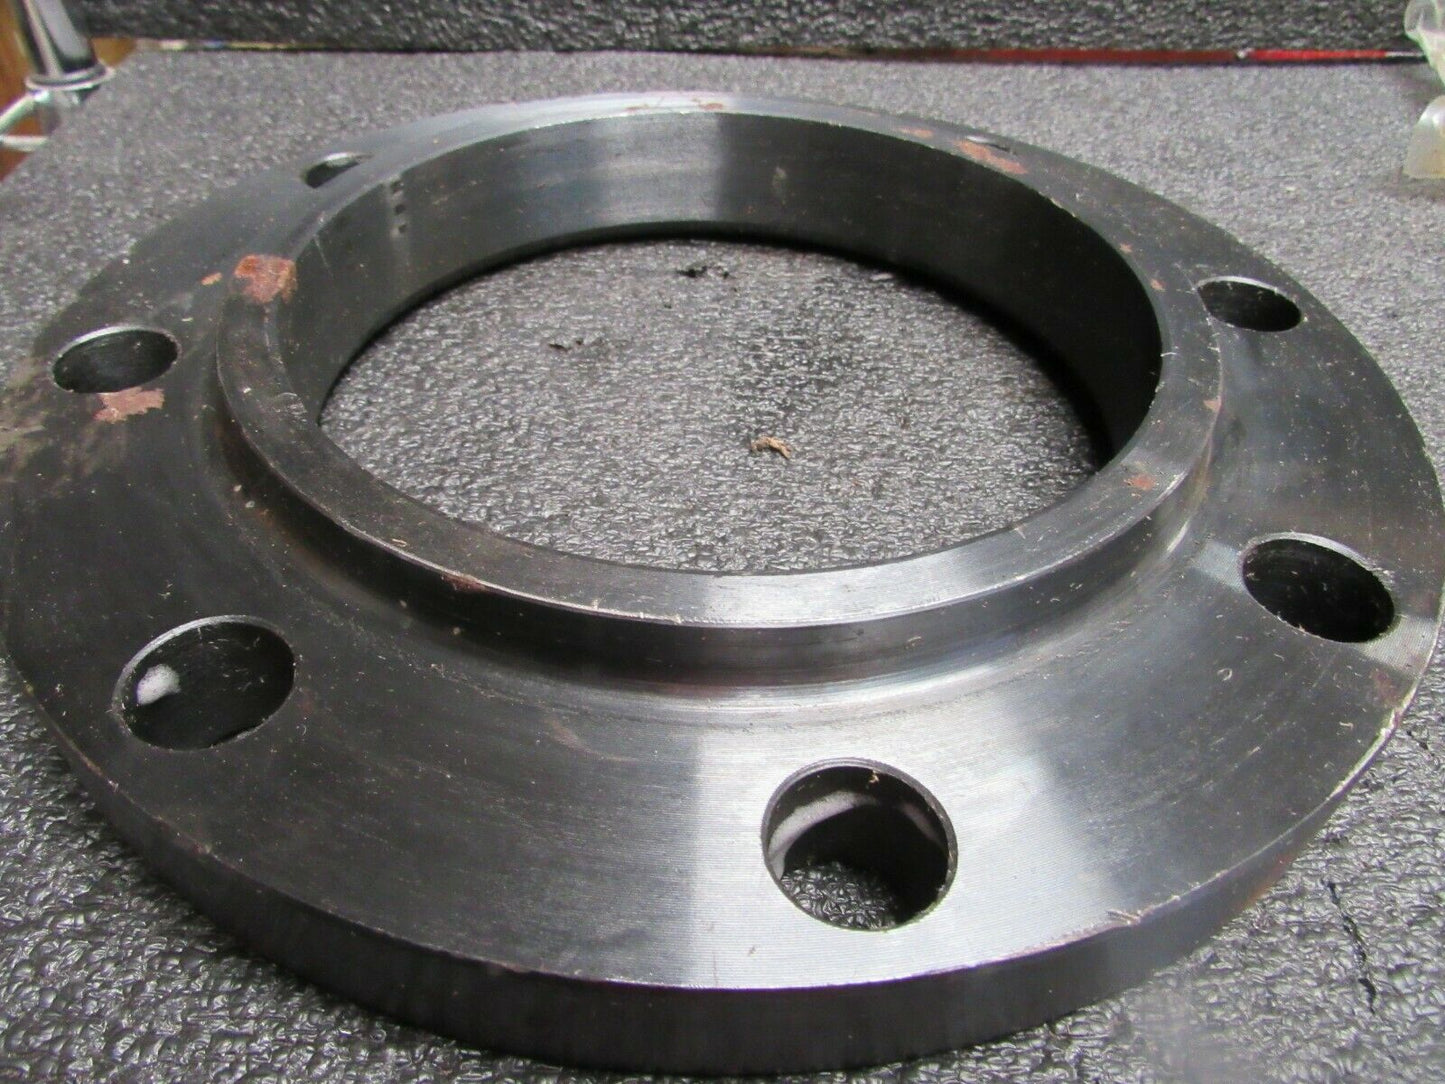 4TXD5 Lap Joint Flange, Welded, 6" Pipe Size - Pipe Fitting (184297314344-BT51)